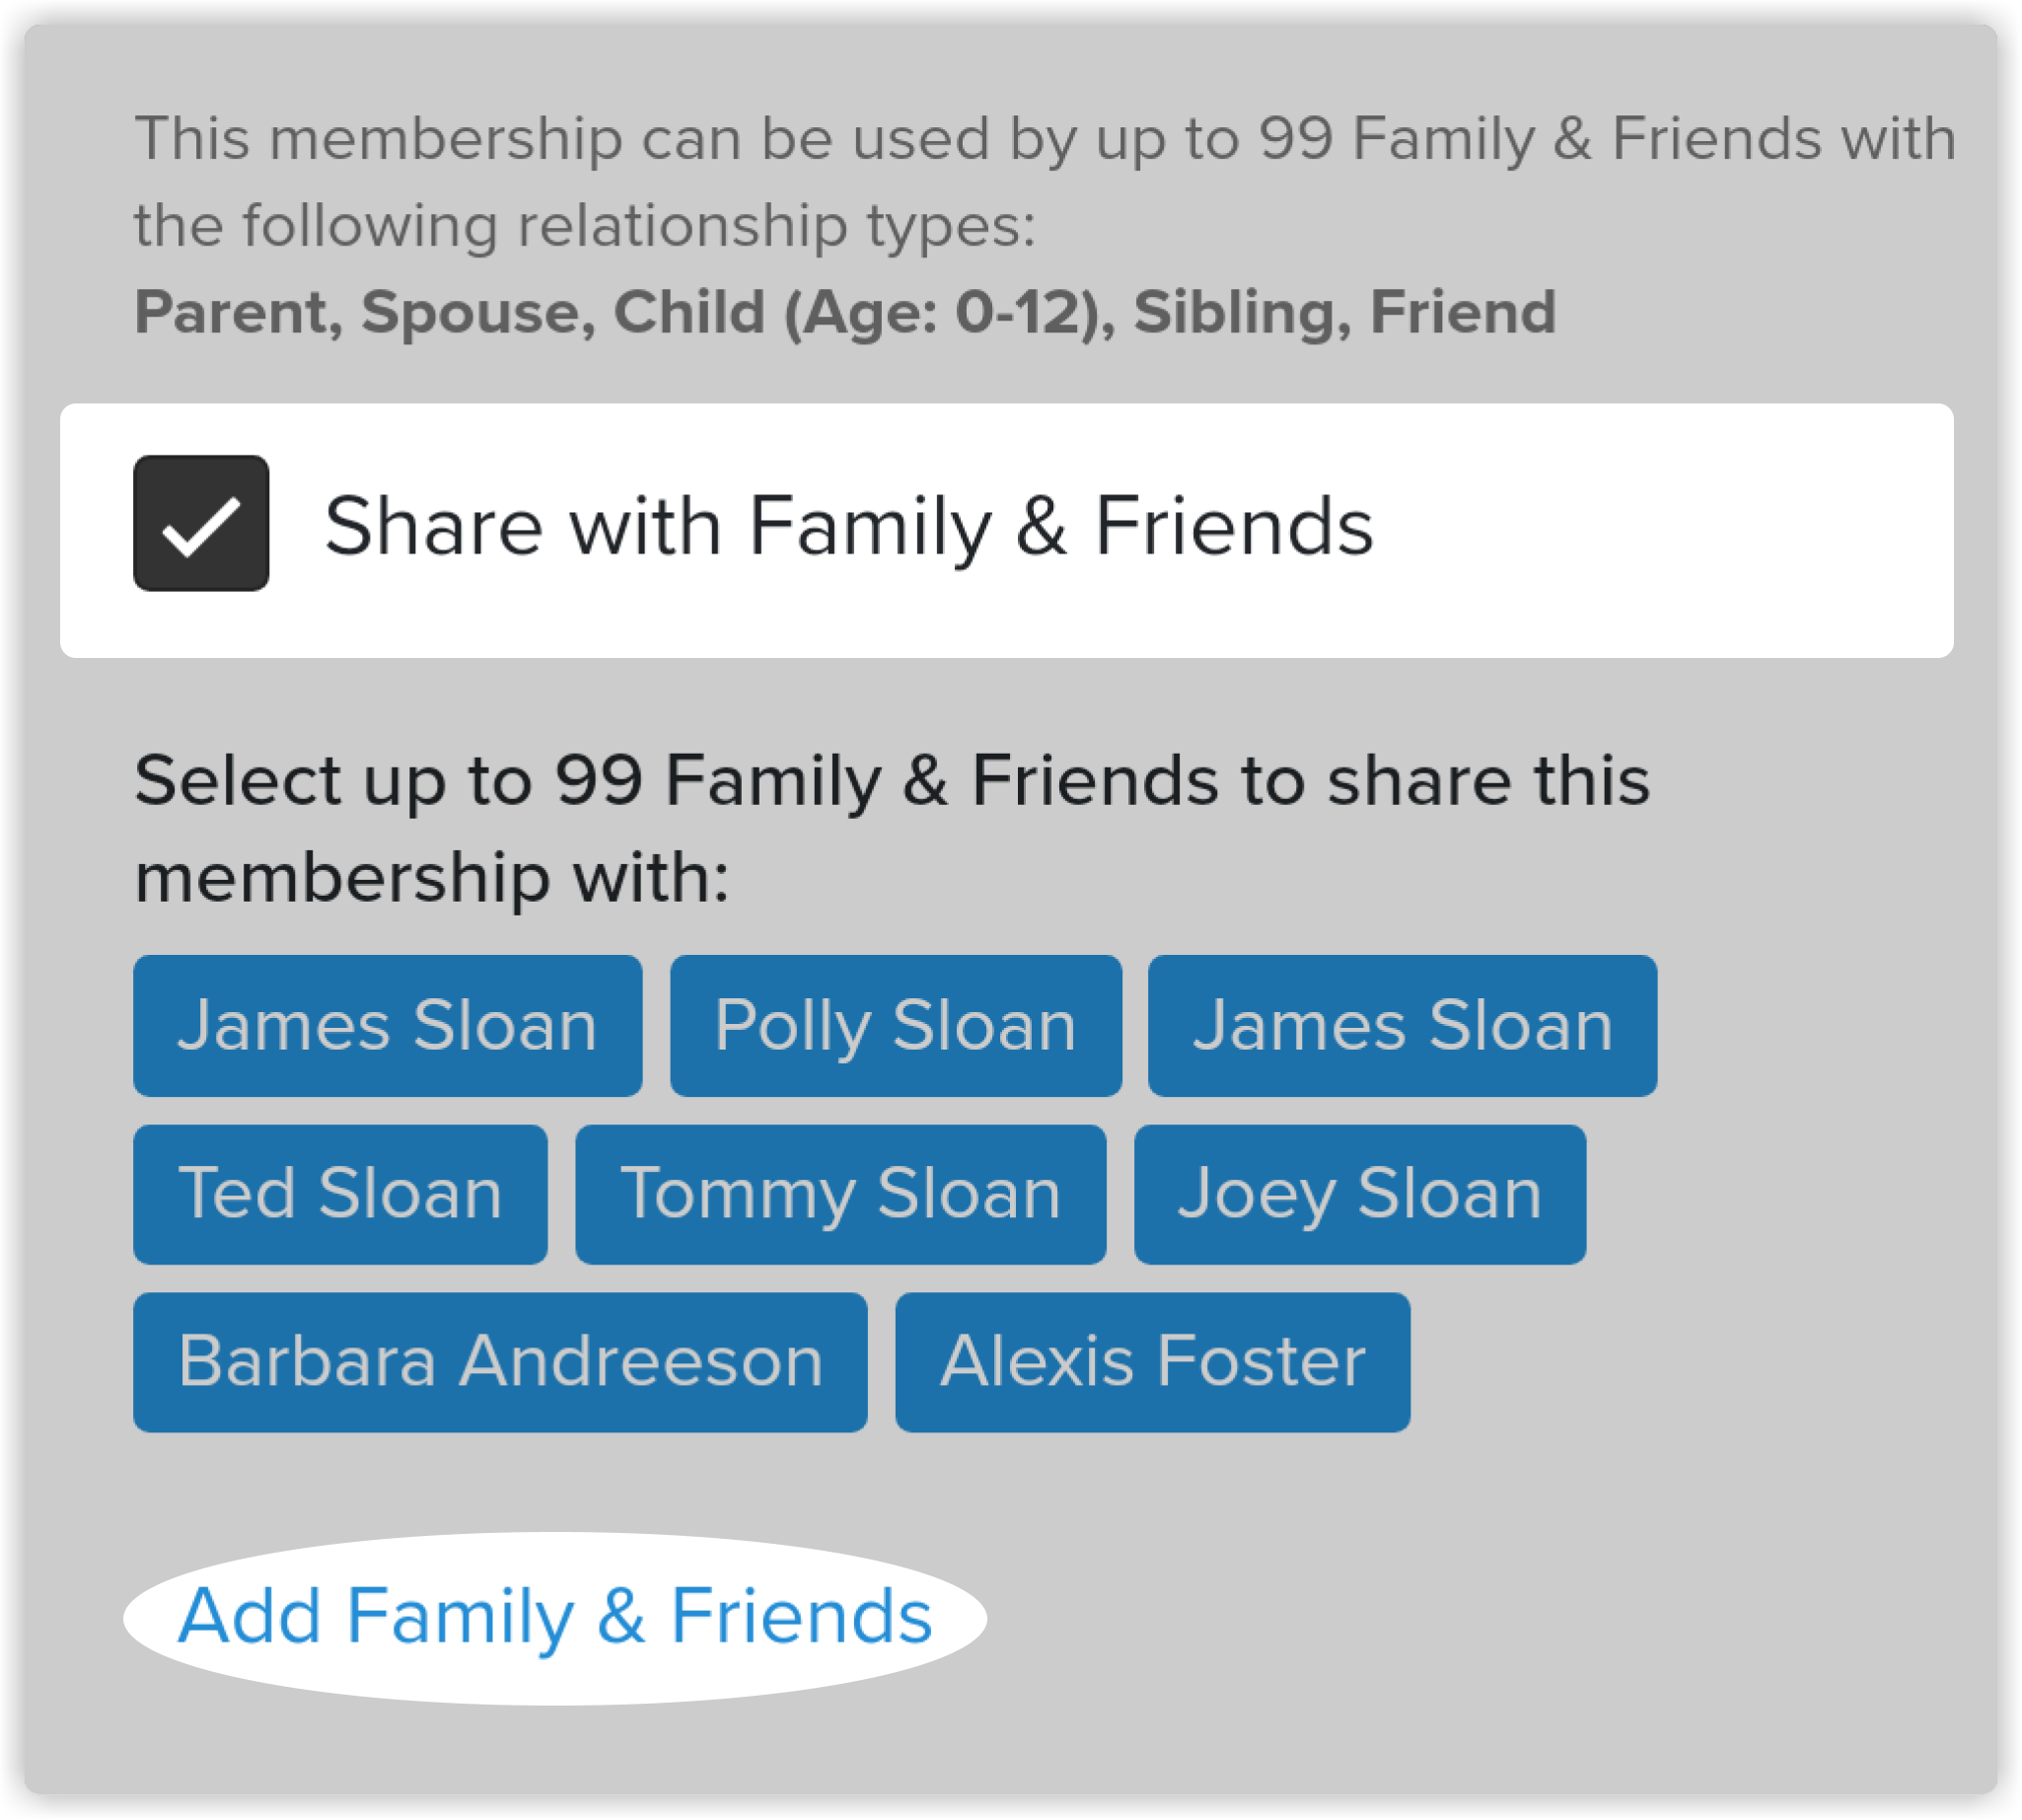 share_with_family_friends_2x.png